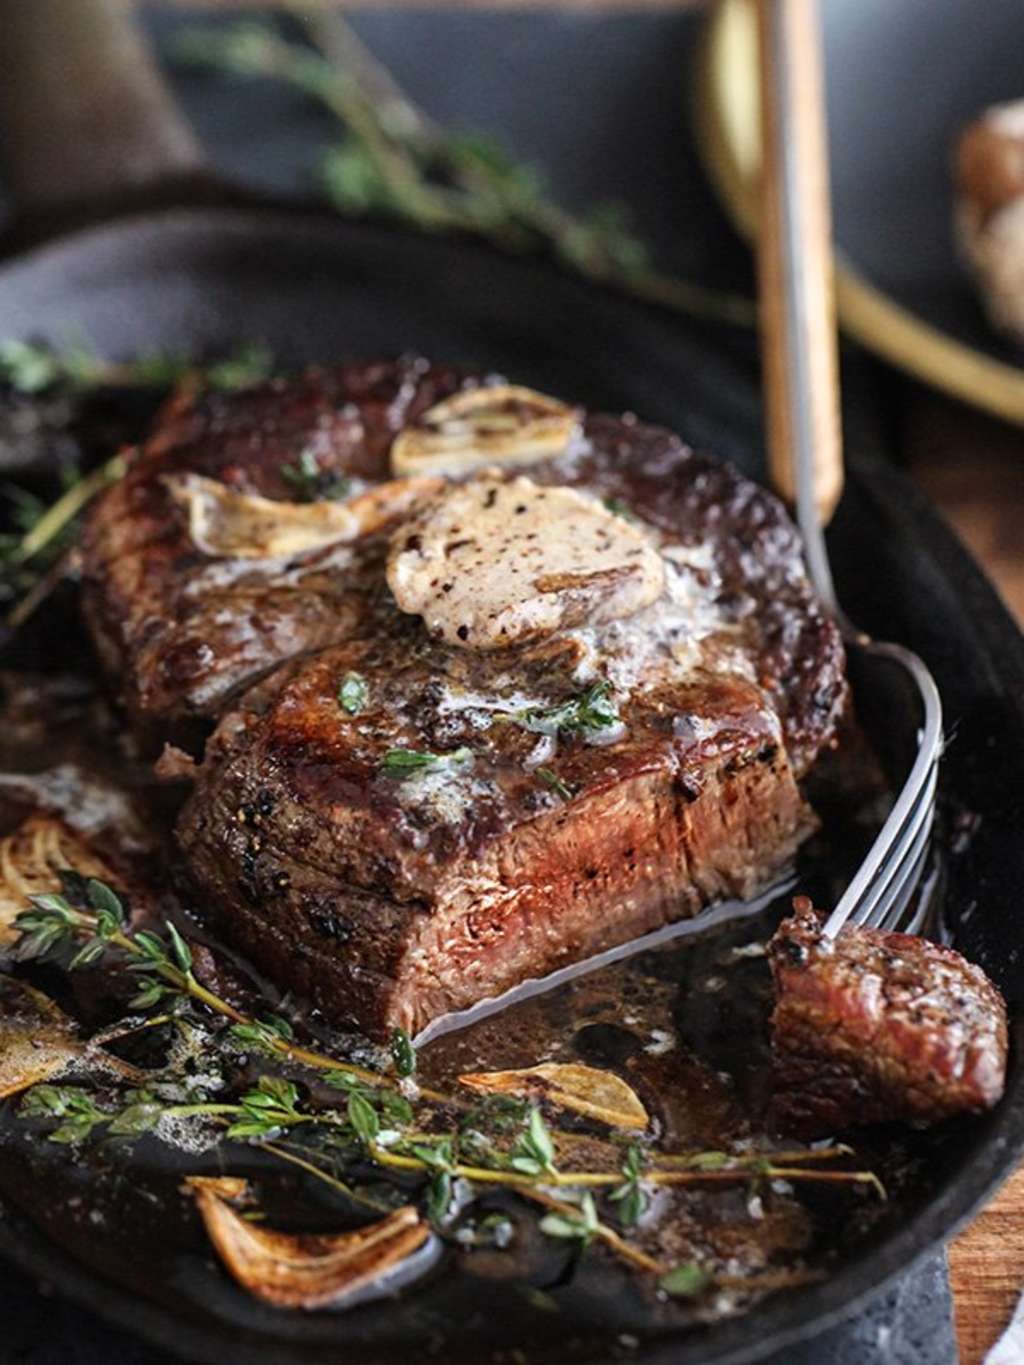 This Steak Is So Good-Looking We Almost Can't Handle It | Kitchn